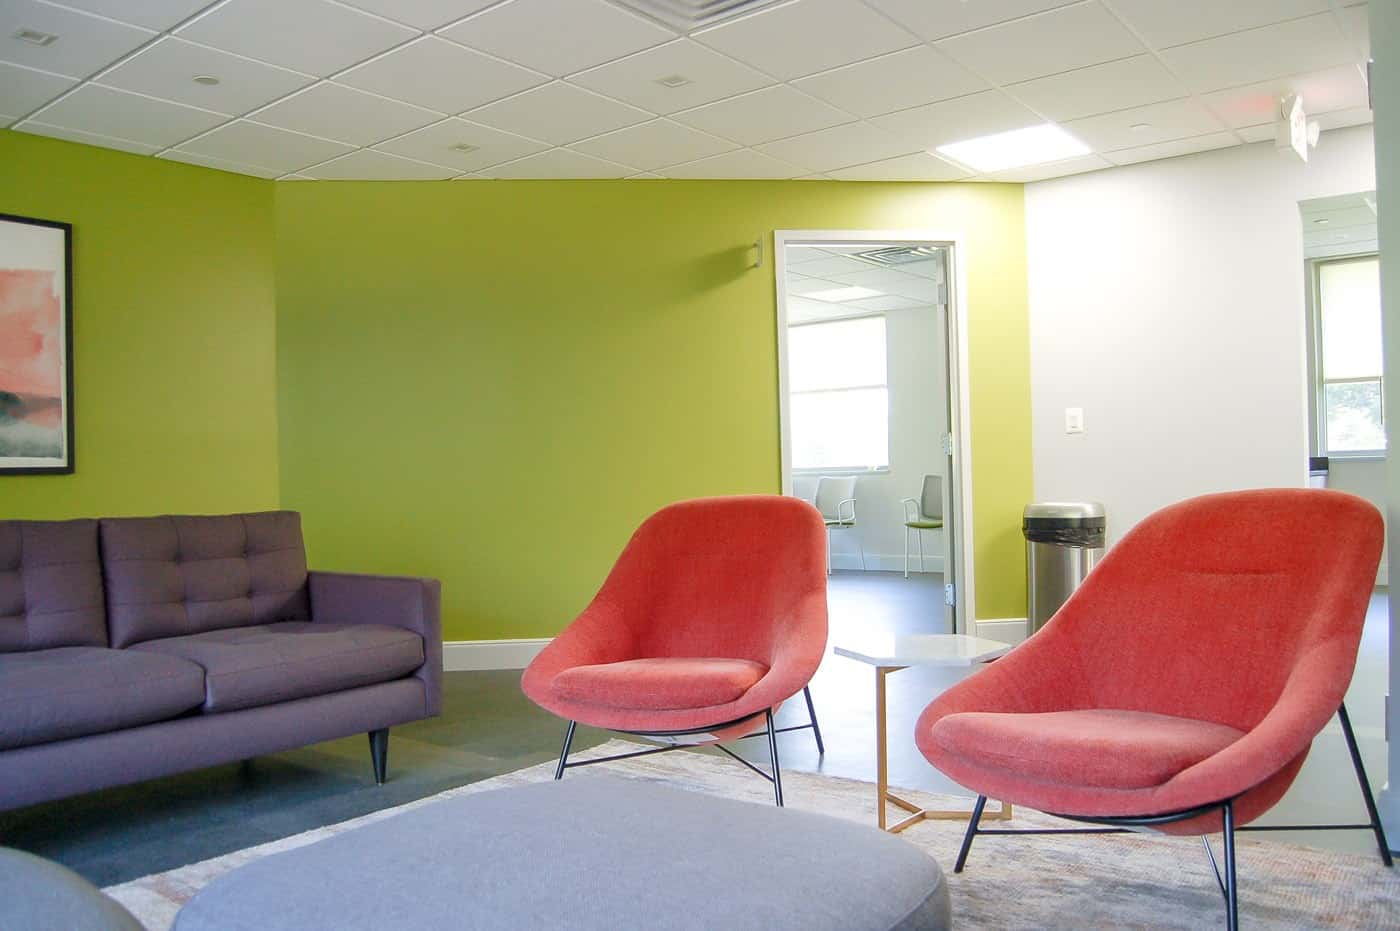 Princeton Detox and Recovery Lounge and Meeting Room